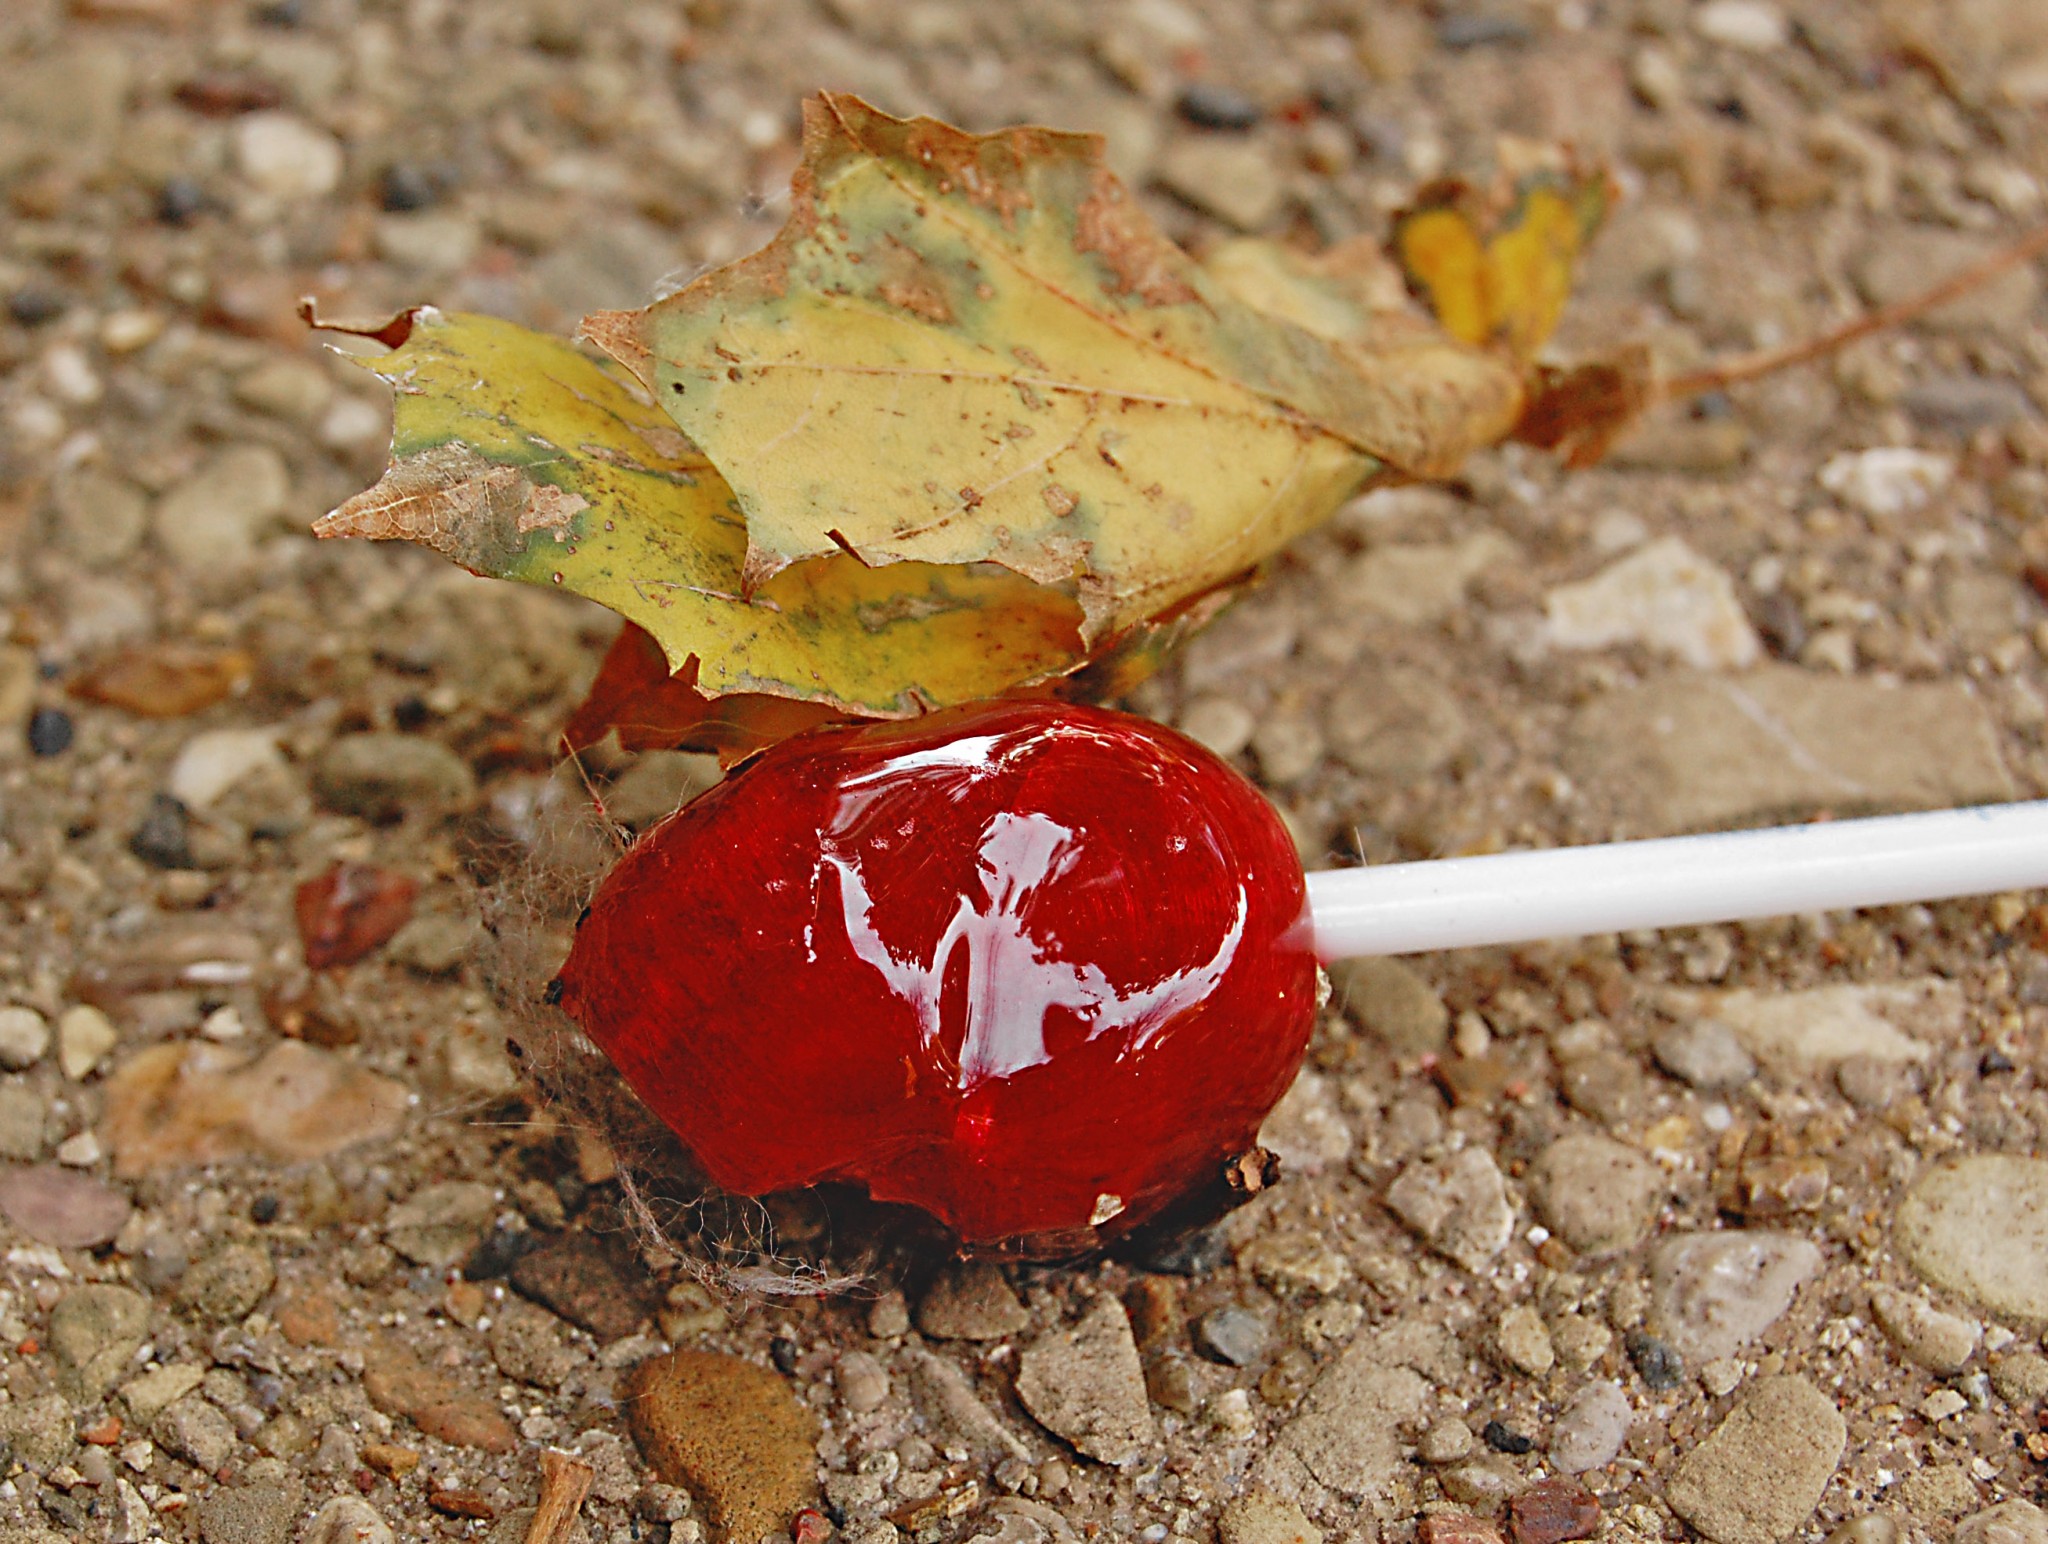 Red lollipop abandon on the pavement, with a yellow leaf on top.